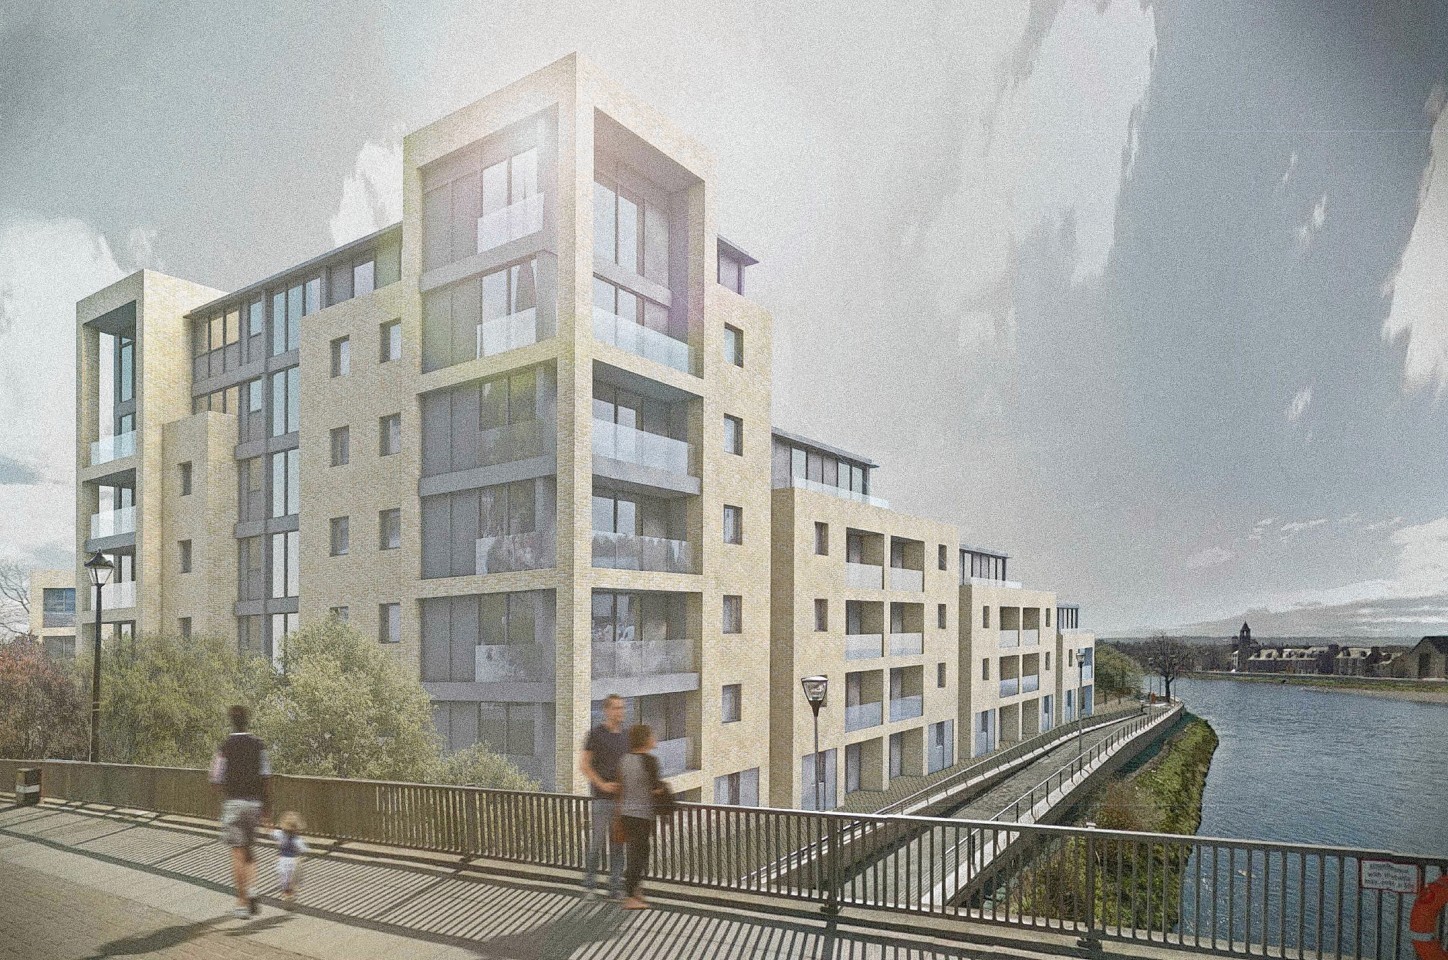 An artist's impression of Tulloch Homes' plan for Glebe Street in Inverness